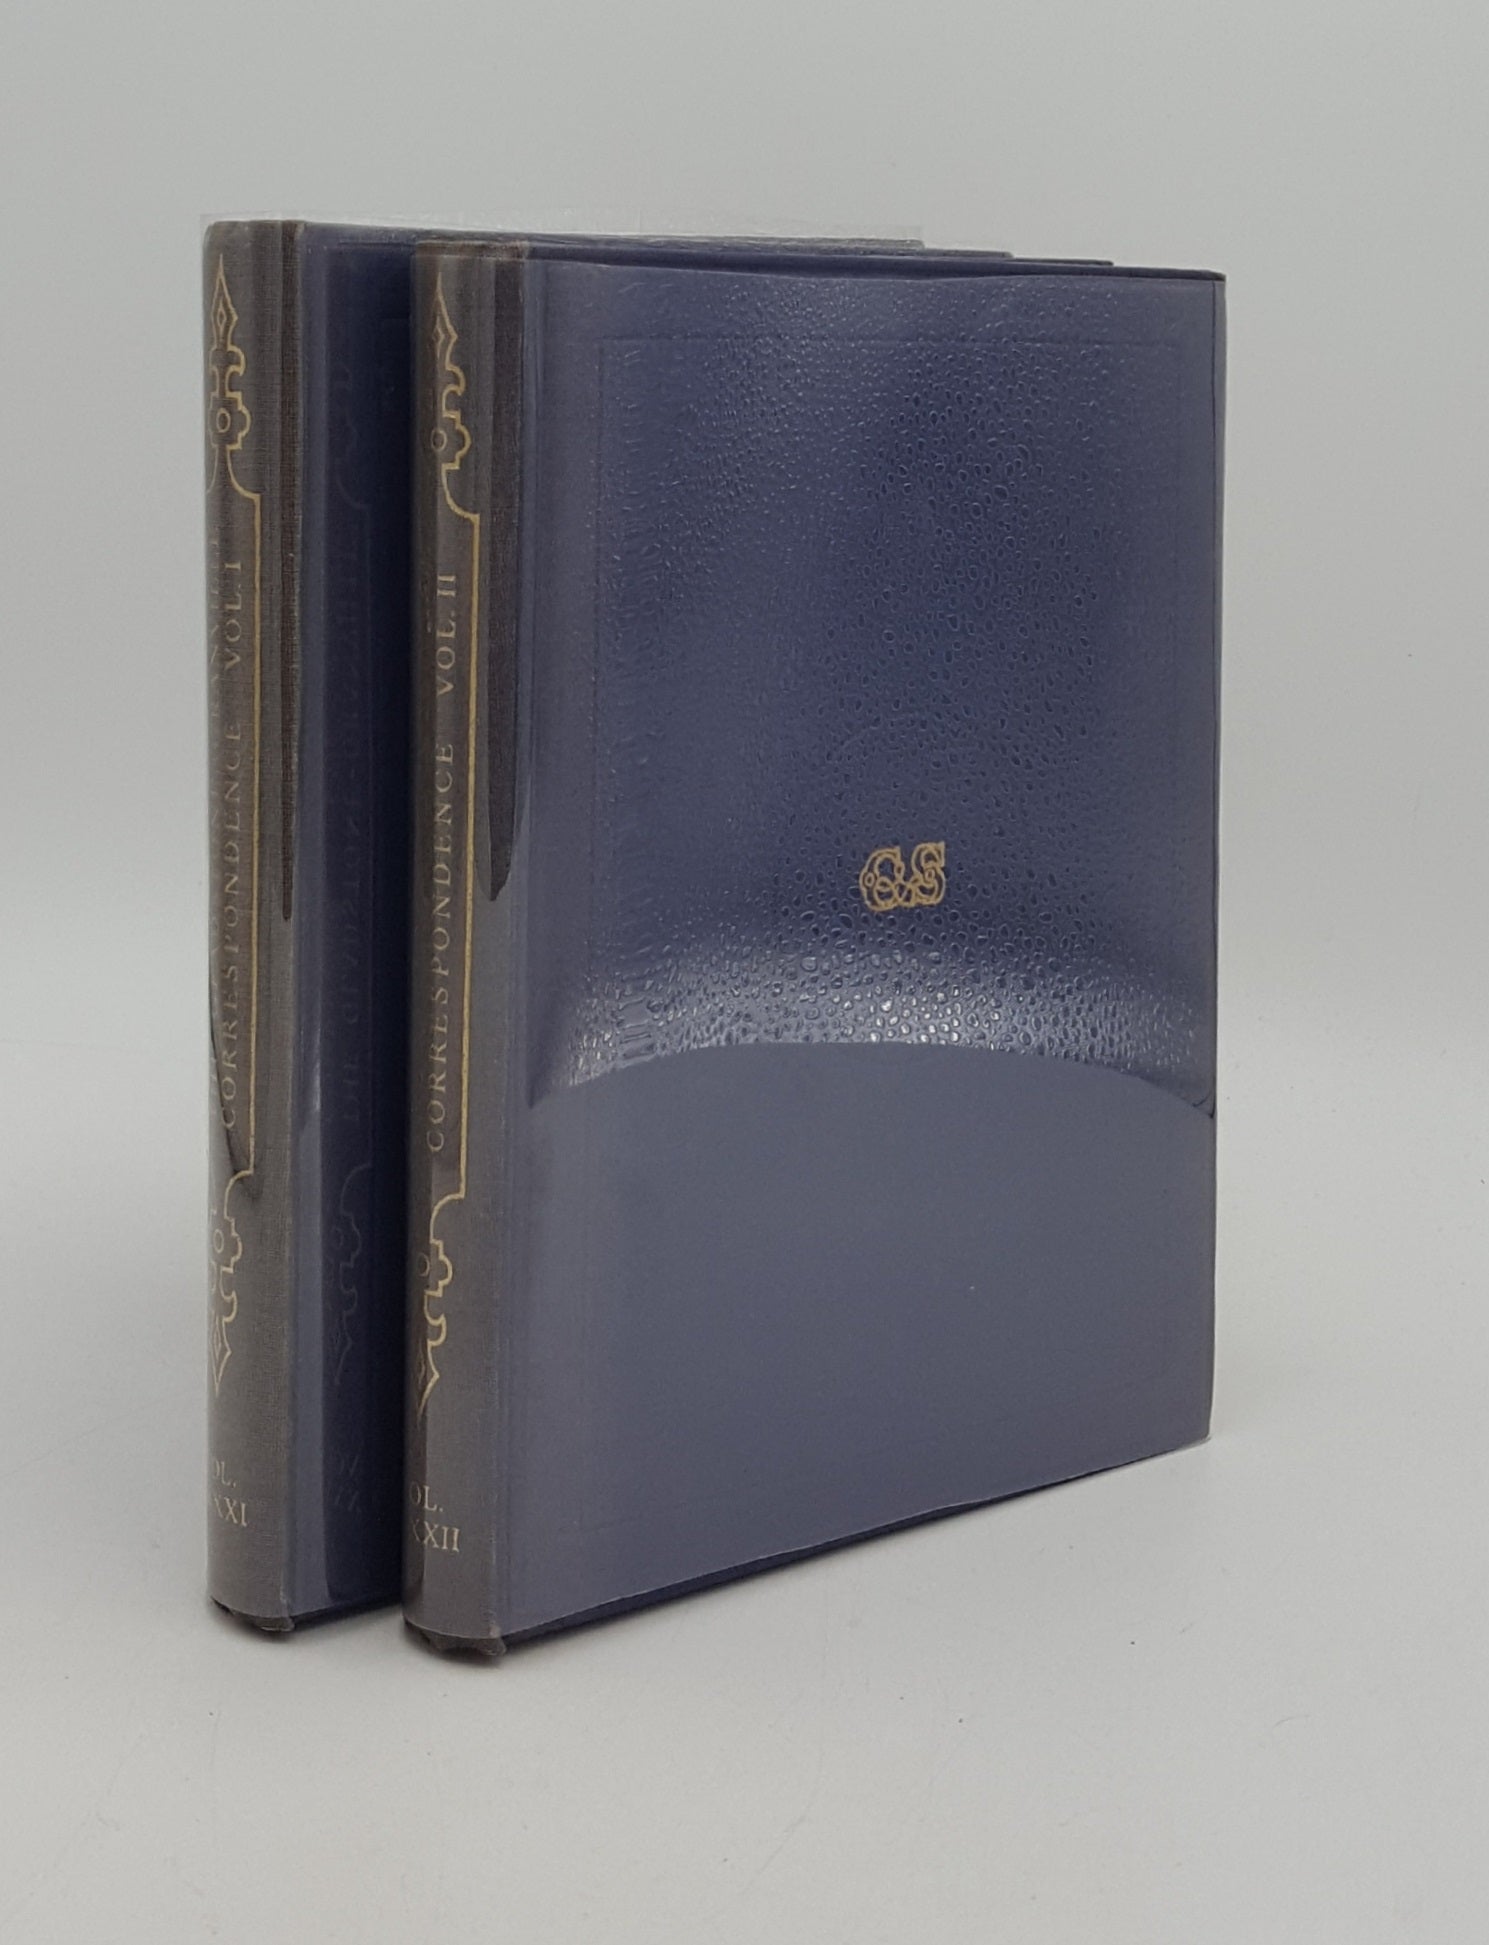 RAMM Agatha - The Political Correspondence of Mr Gladstone and Lord Granville 1868-1876 Volume I 1868-1871 [&] Volume II 1871-1876